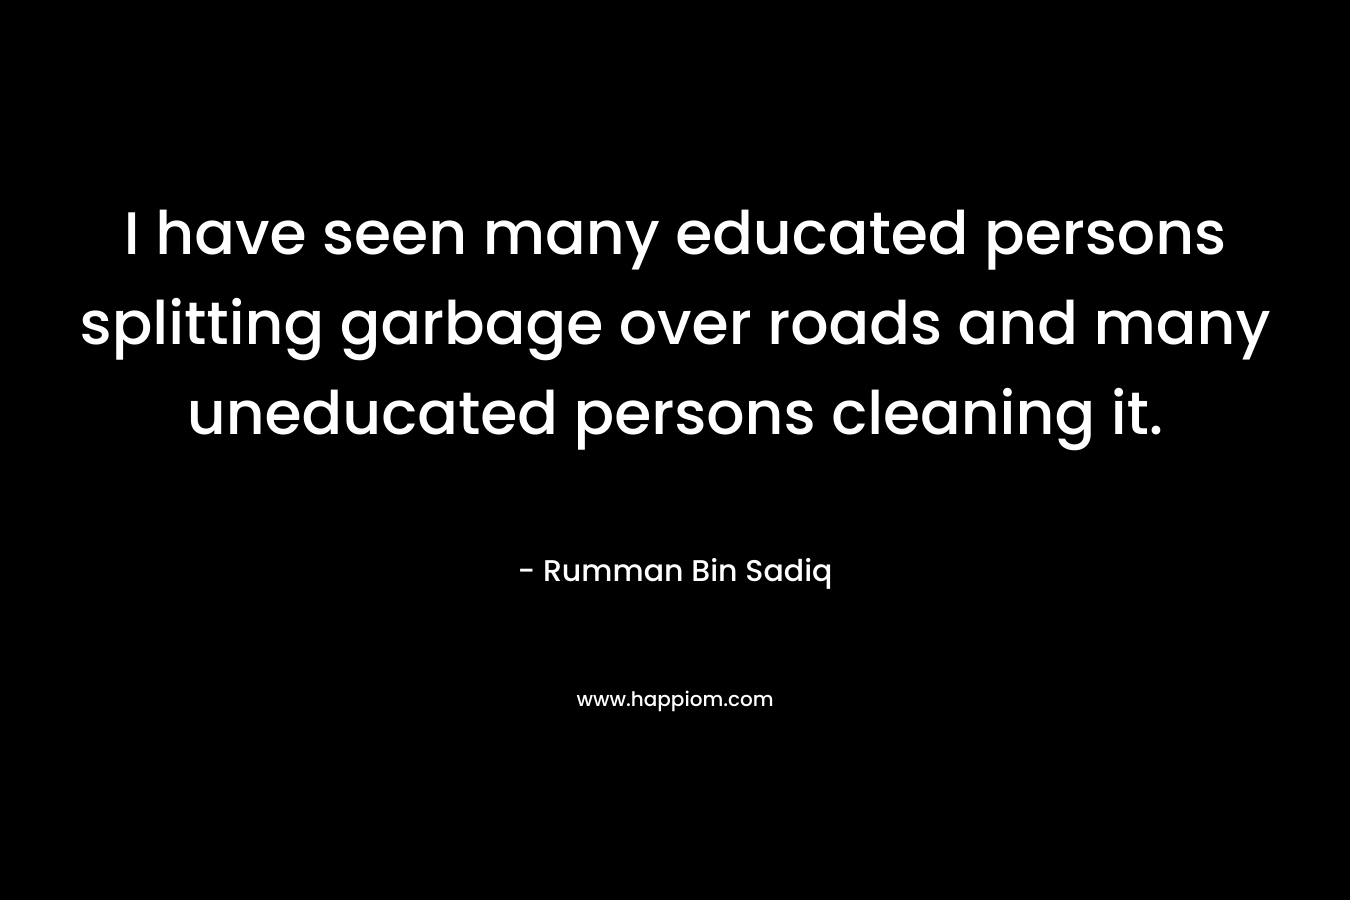 I have seen many educated persons splitting garbage over roads and many uneducated persons cleaning it. – Rumman Bin Sadiq